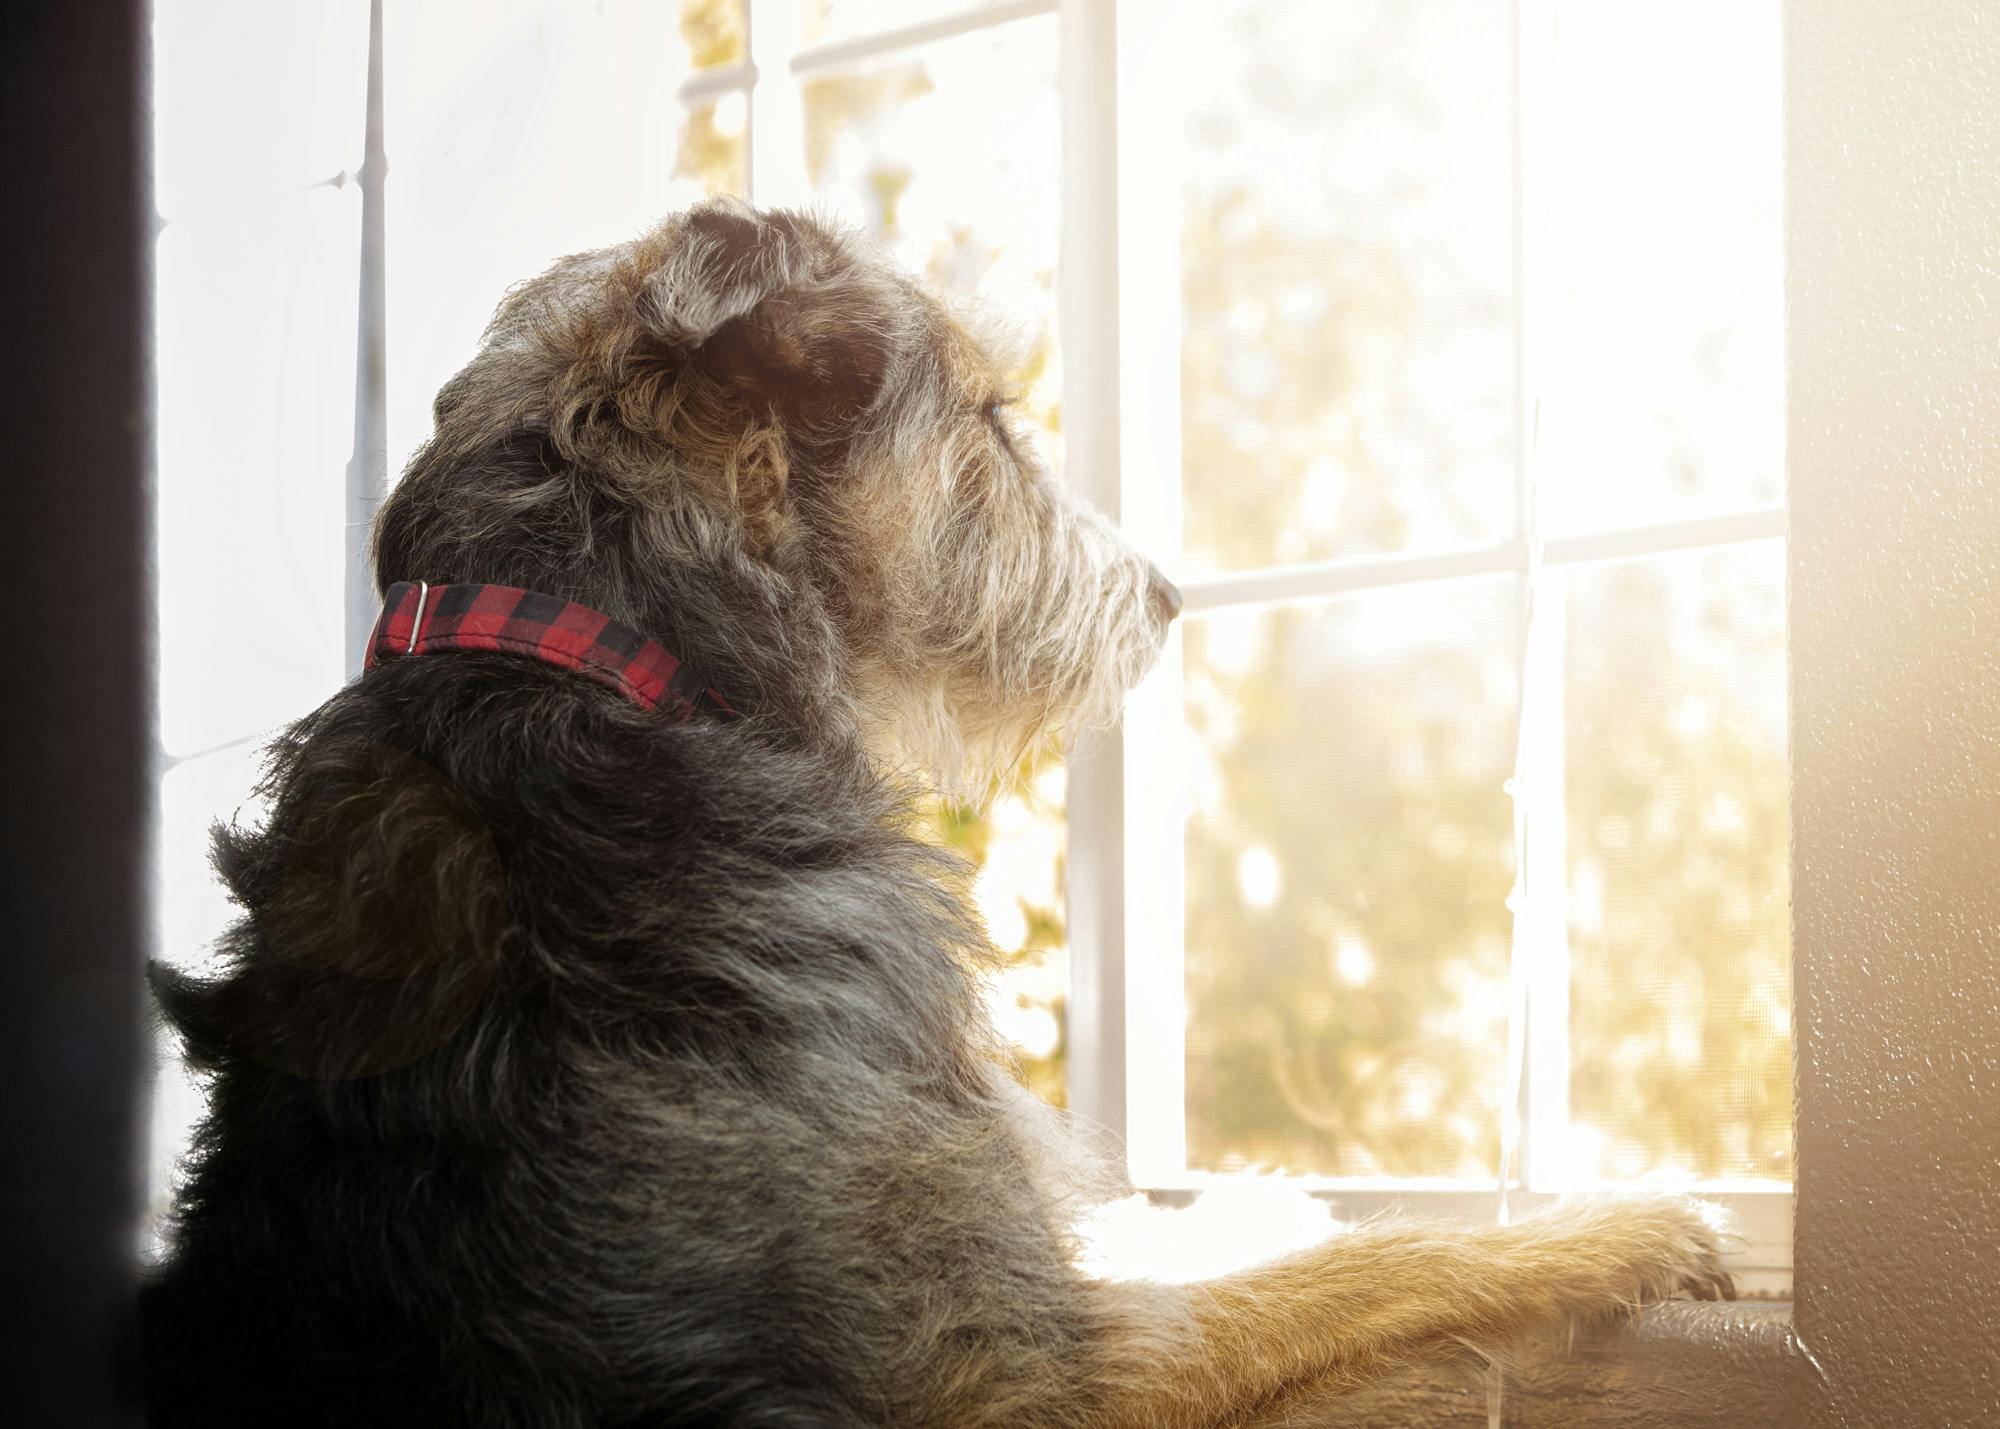 Dog looks out window separation anxiety